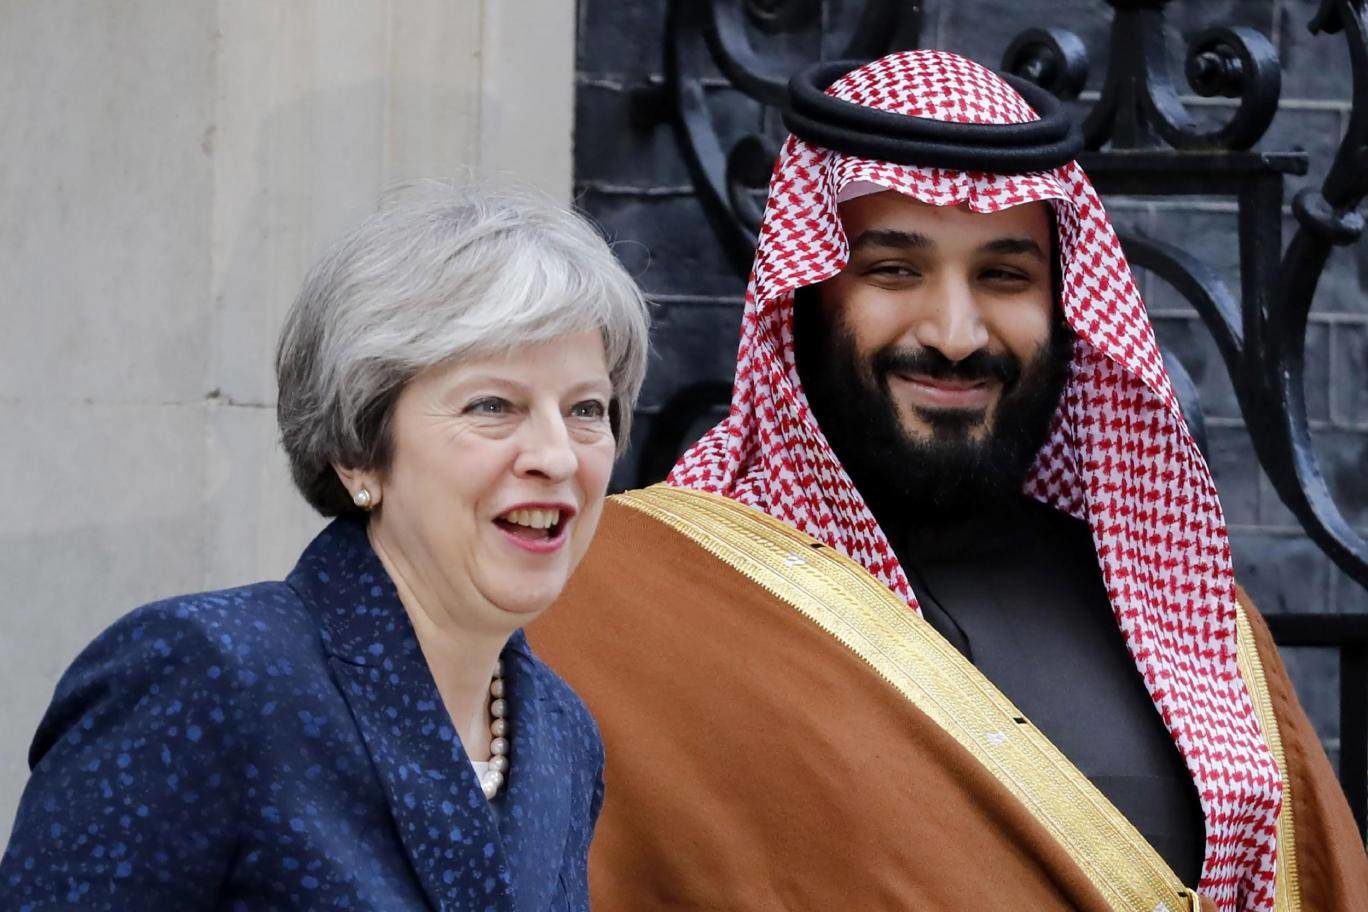 Theresa May welcomed Mohammad bin Salman to Downing Street this week